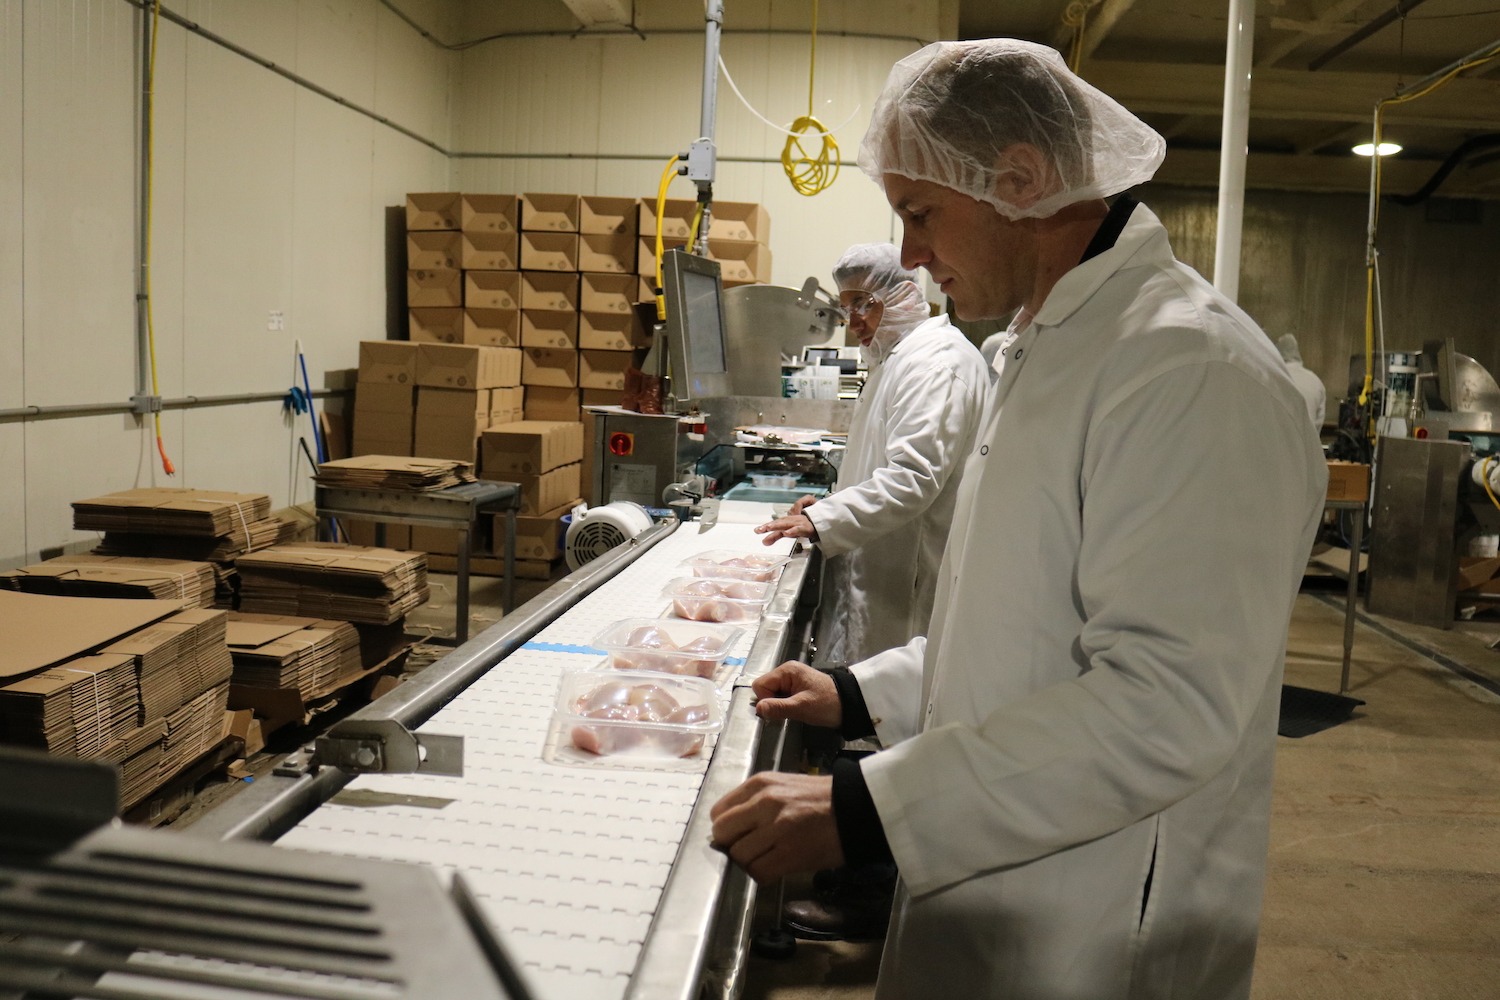 Corwin Heatwole watches drumsticks come off the packaging line at the company's processing plant in Harrisonburg, Virginia (March 2020)